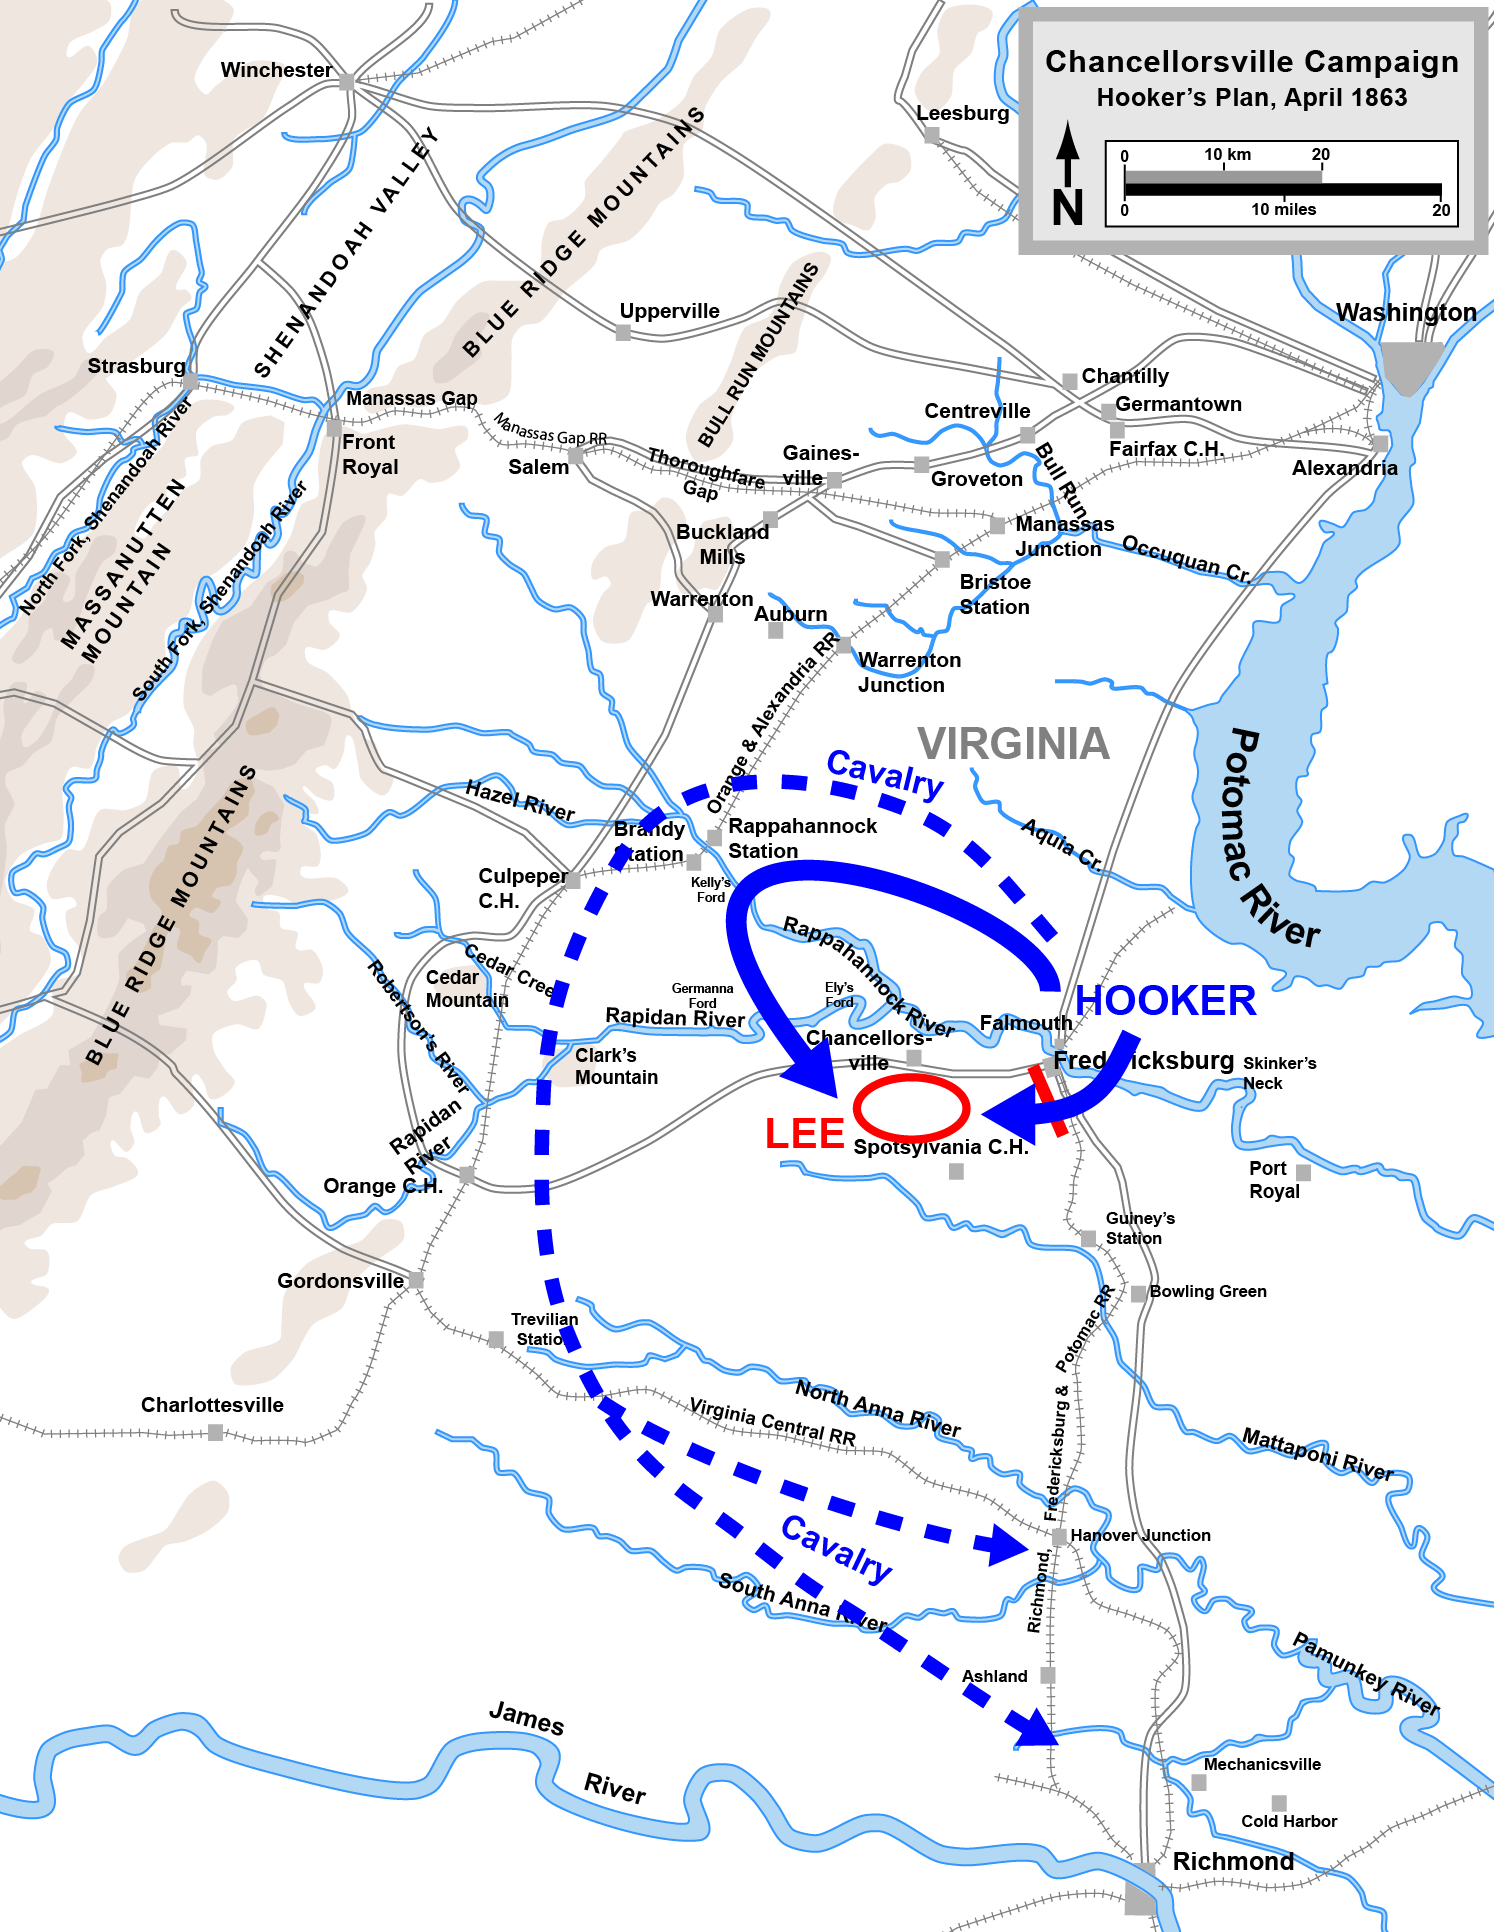 Hooker's plan for the Chancelorsville Campaign